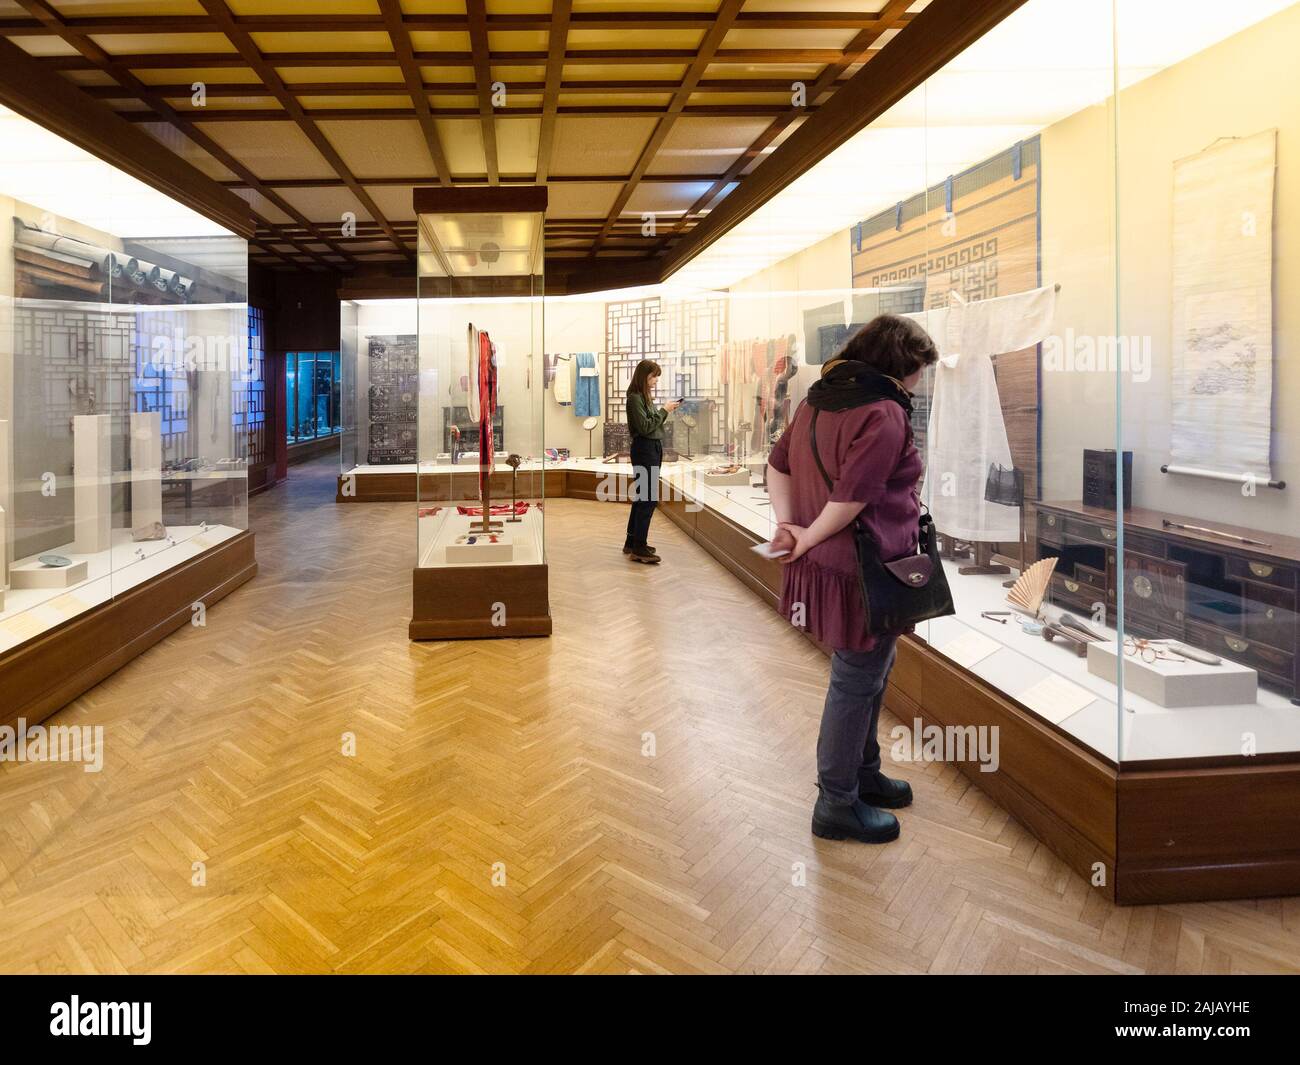 MOSCOW, RUSSIA - JANUARY 2, 2020: visitors in Chinese arts and crafts room in State Museum of Oriental Art . The Museum preserves, researches and disp Stock Photo